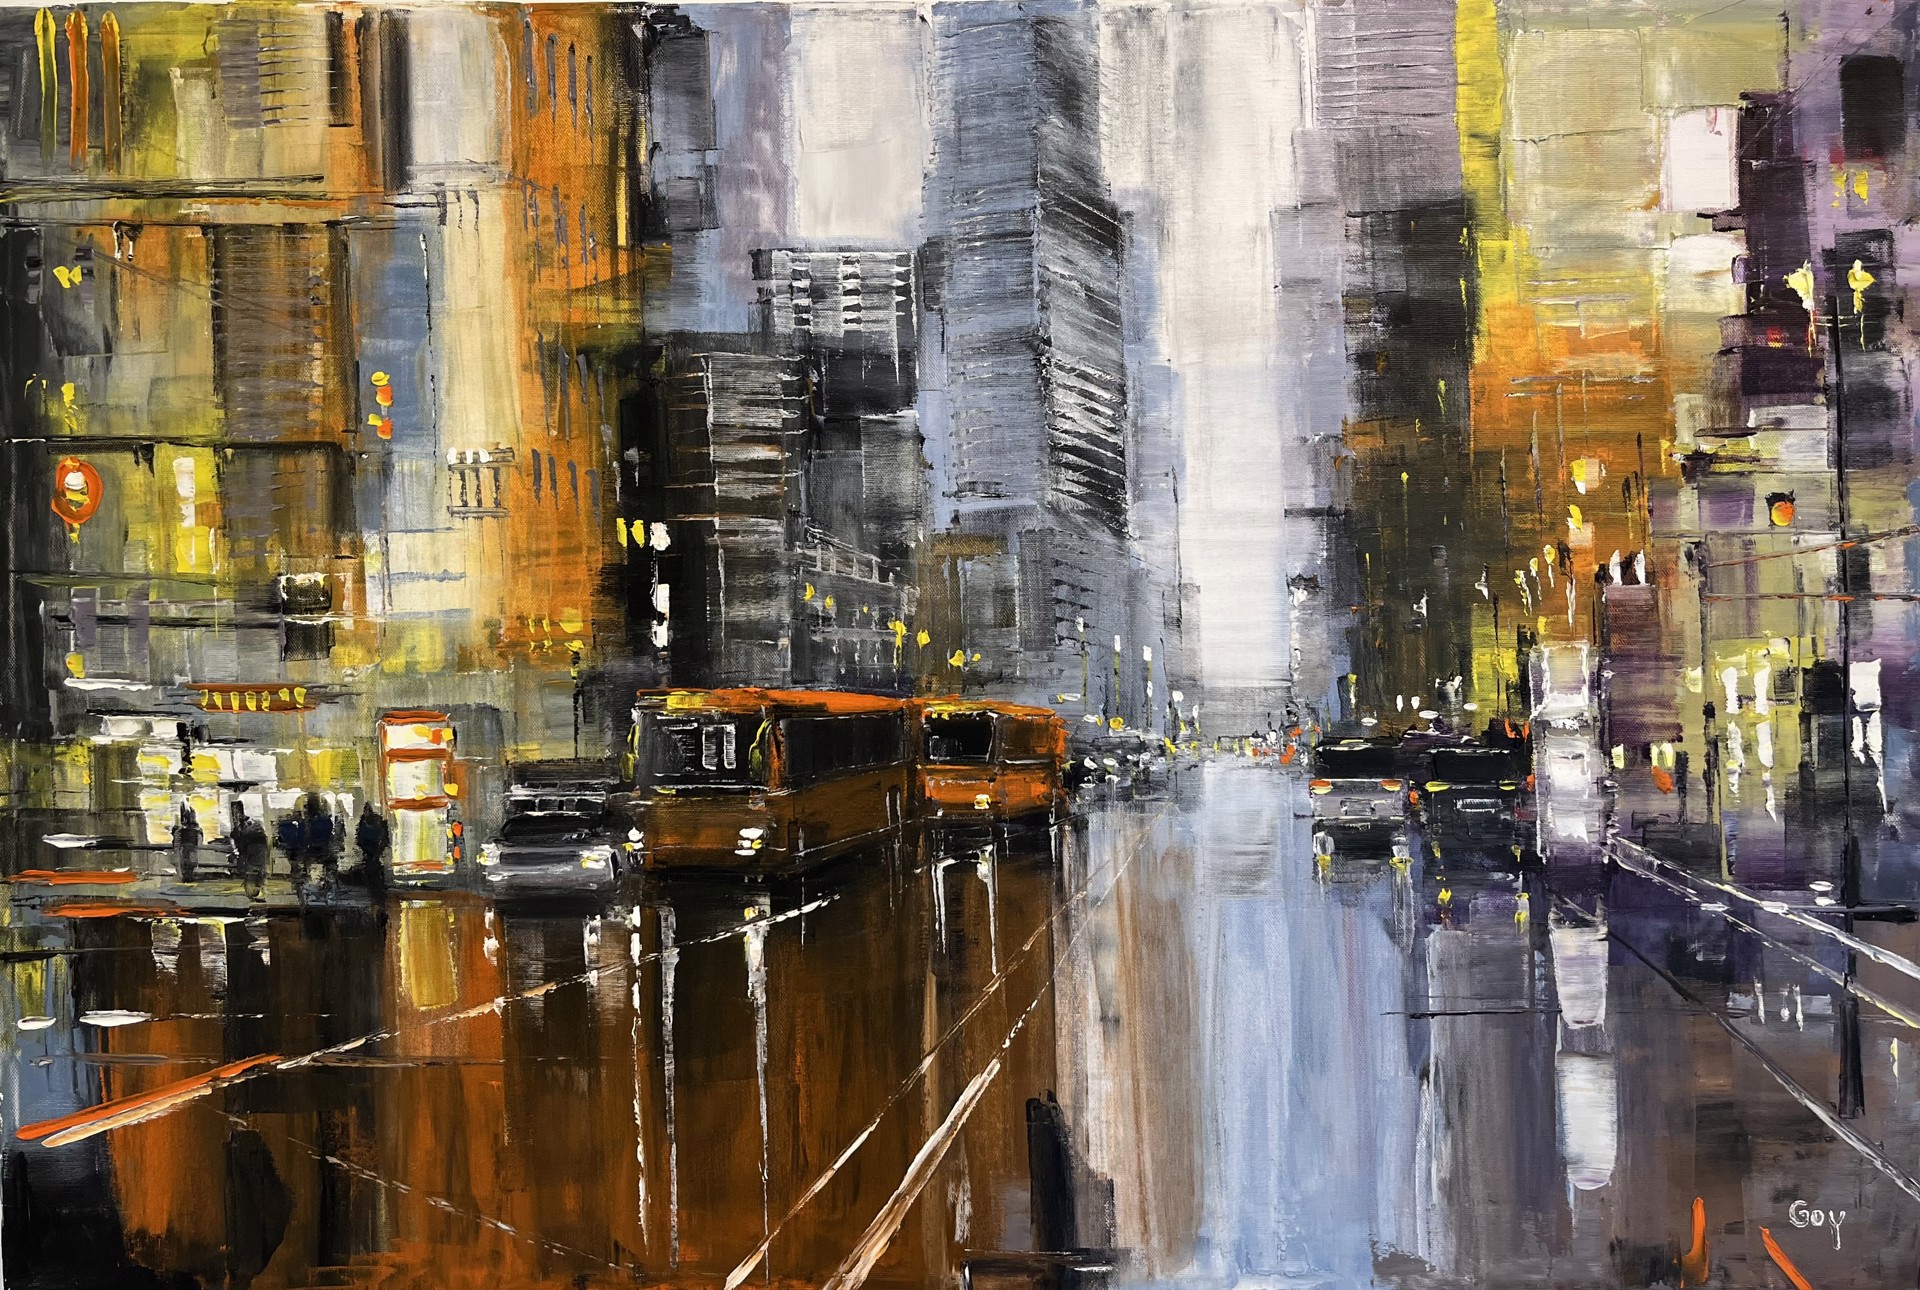 City Scape #1 by Gregory Goy